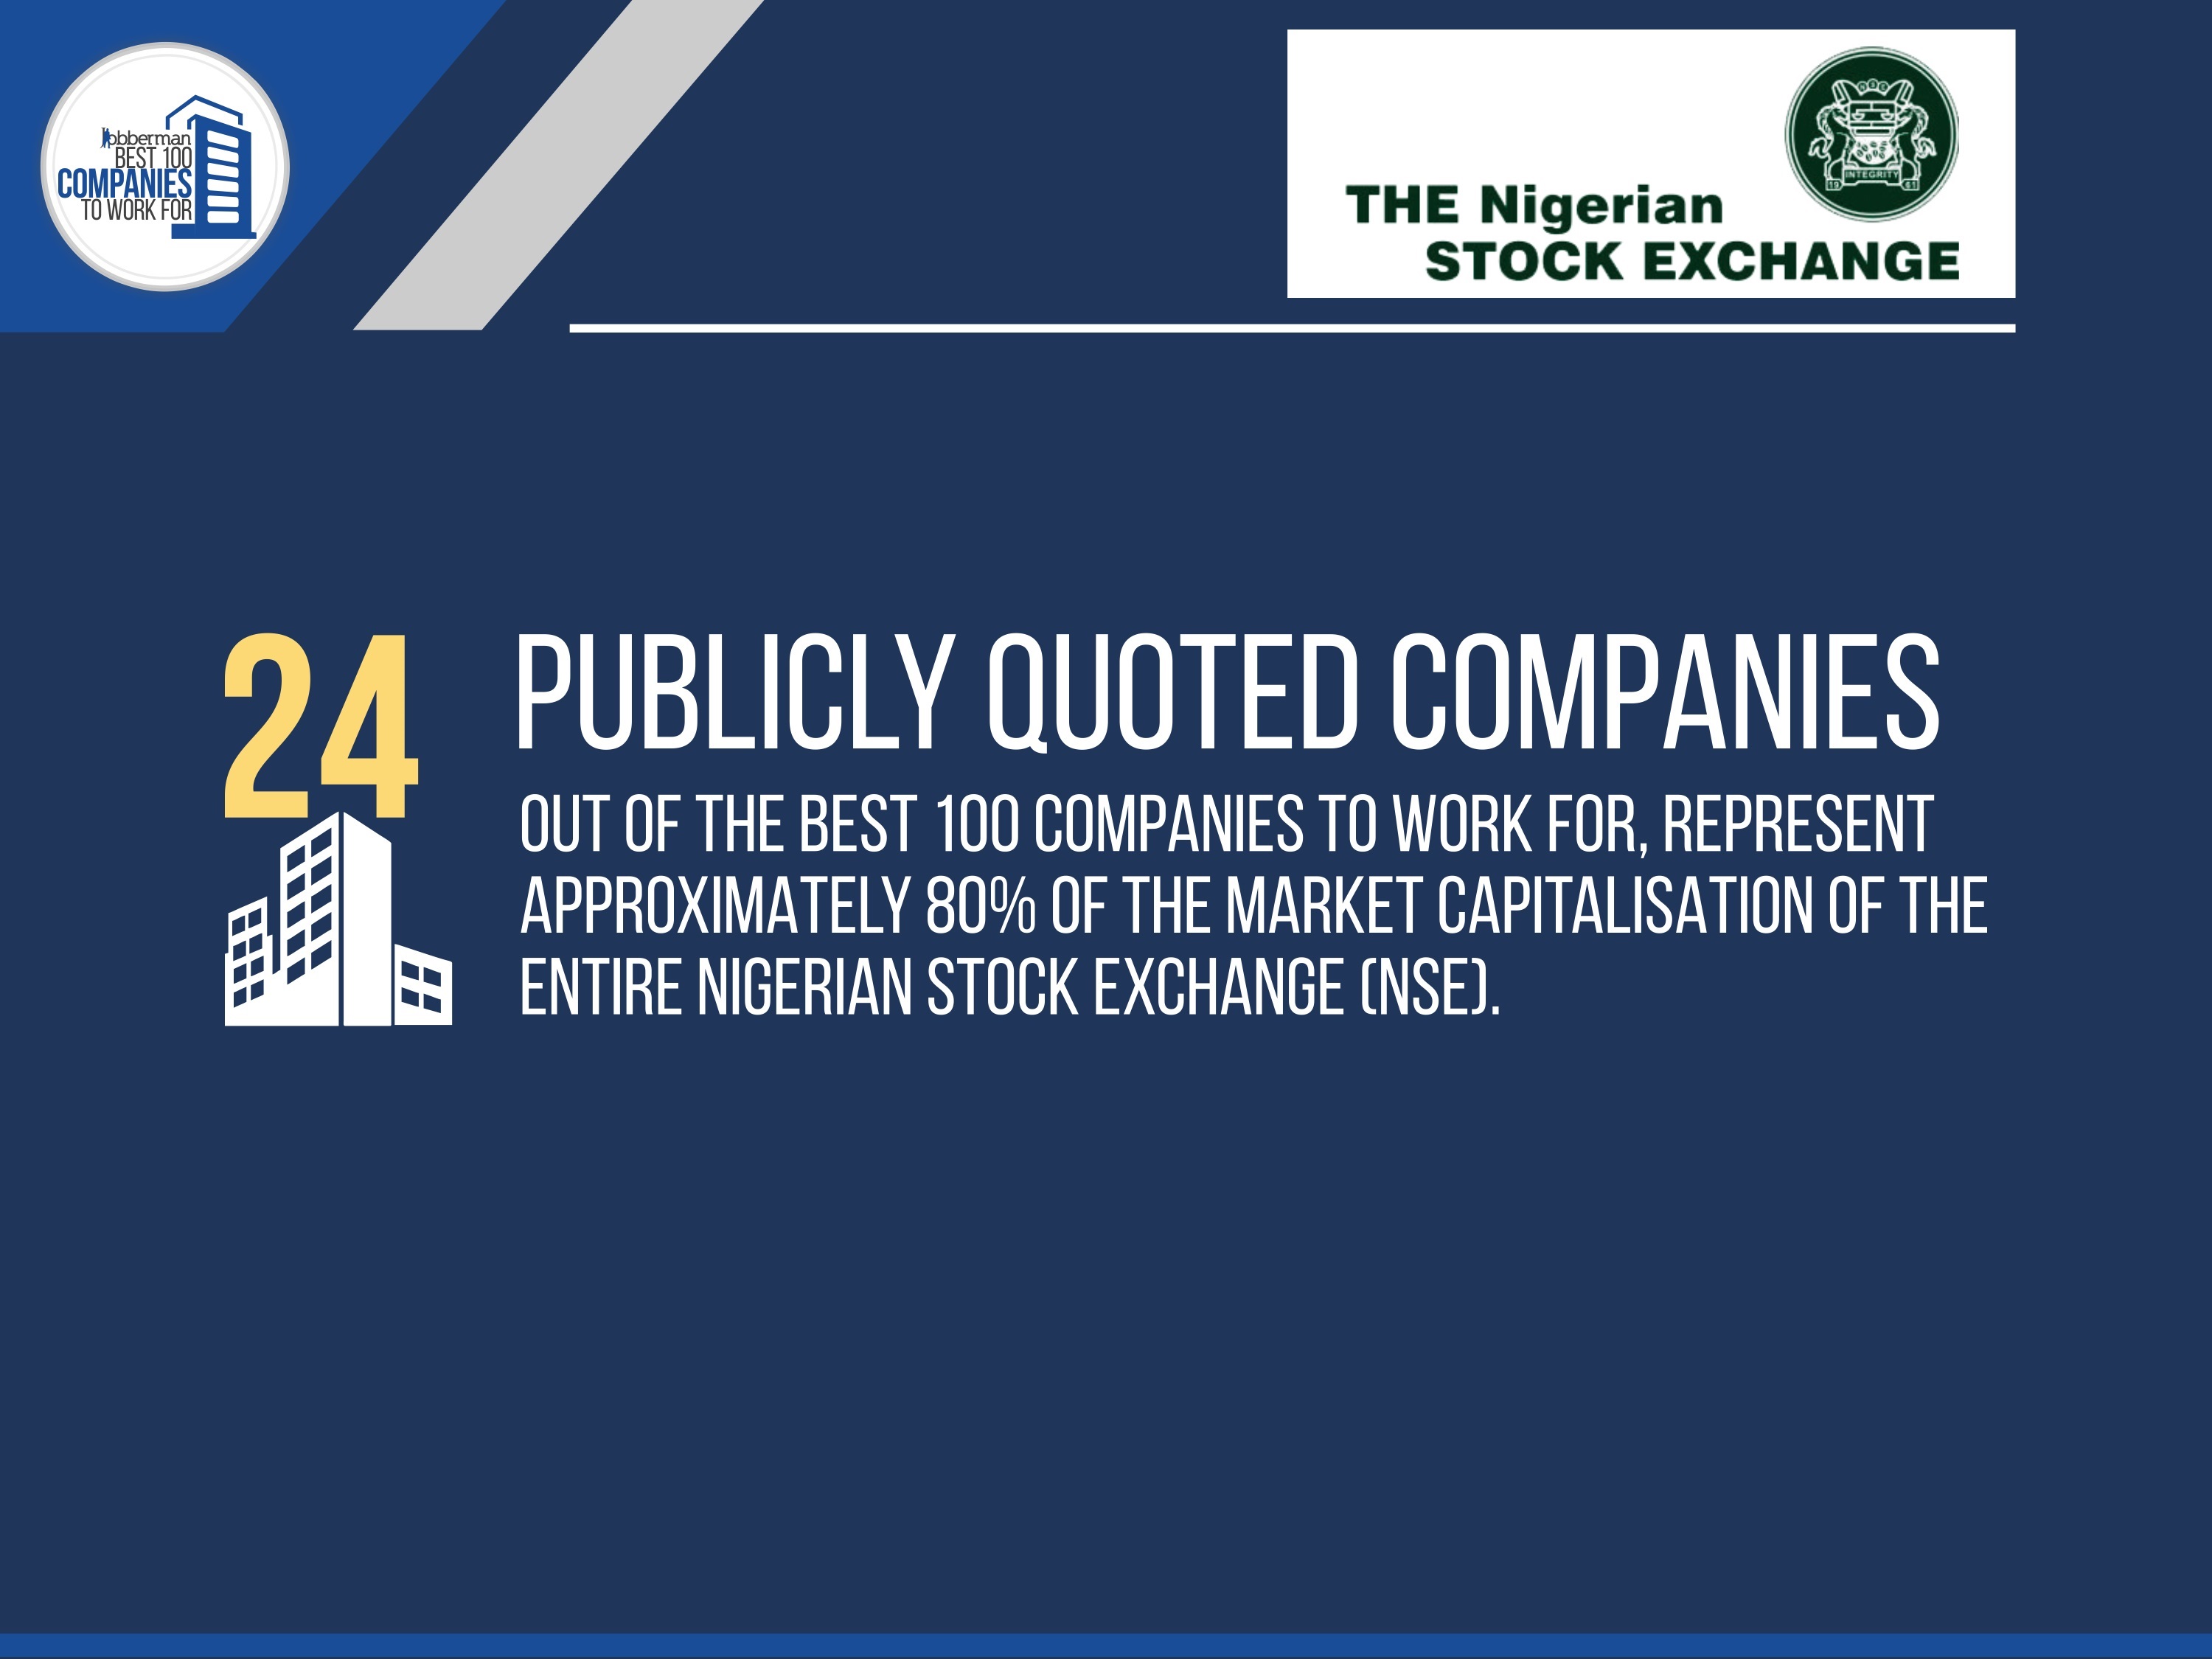 Best 100 Companies to Work For in Nigeria 2016 (15)